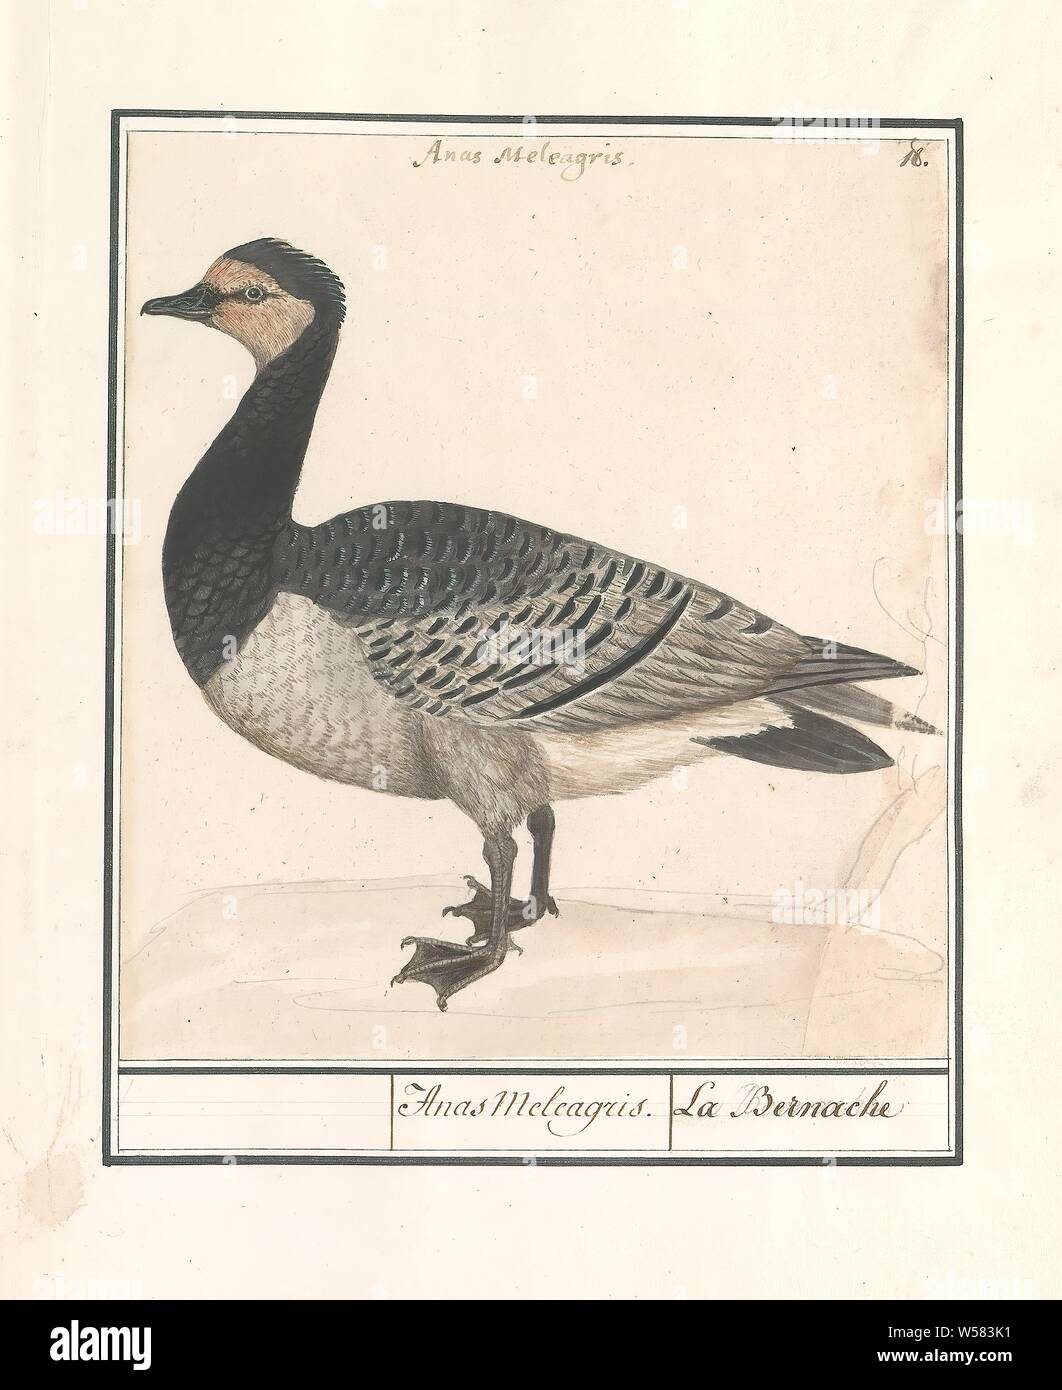 Barnacle Goose (Branta leucopsis), Anas Meleagris. / La Bernache (title on object), Barnacle Goose. Numbered top right: 18. At the top the Latin name. Part of the third album with drawings of birds. Fifth of twelve albums with drawings of animals, birds and plants known around 1600, commissioned by Emperor Rudolf II. With explanation in Dutch, Latin and French, Anselmus Boetius de Boodt, 1596 - 1610, paper, watercolor (paint), deck paint, pencil, chalk, ink, pen, h 208 mm × w 185 mm Stock Photo